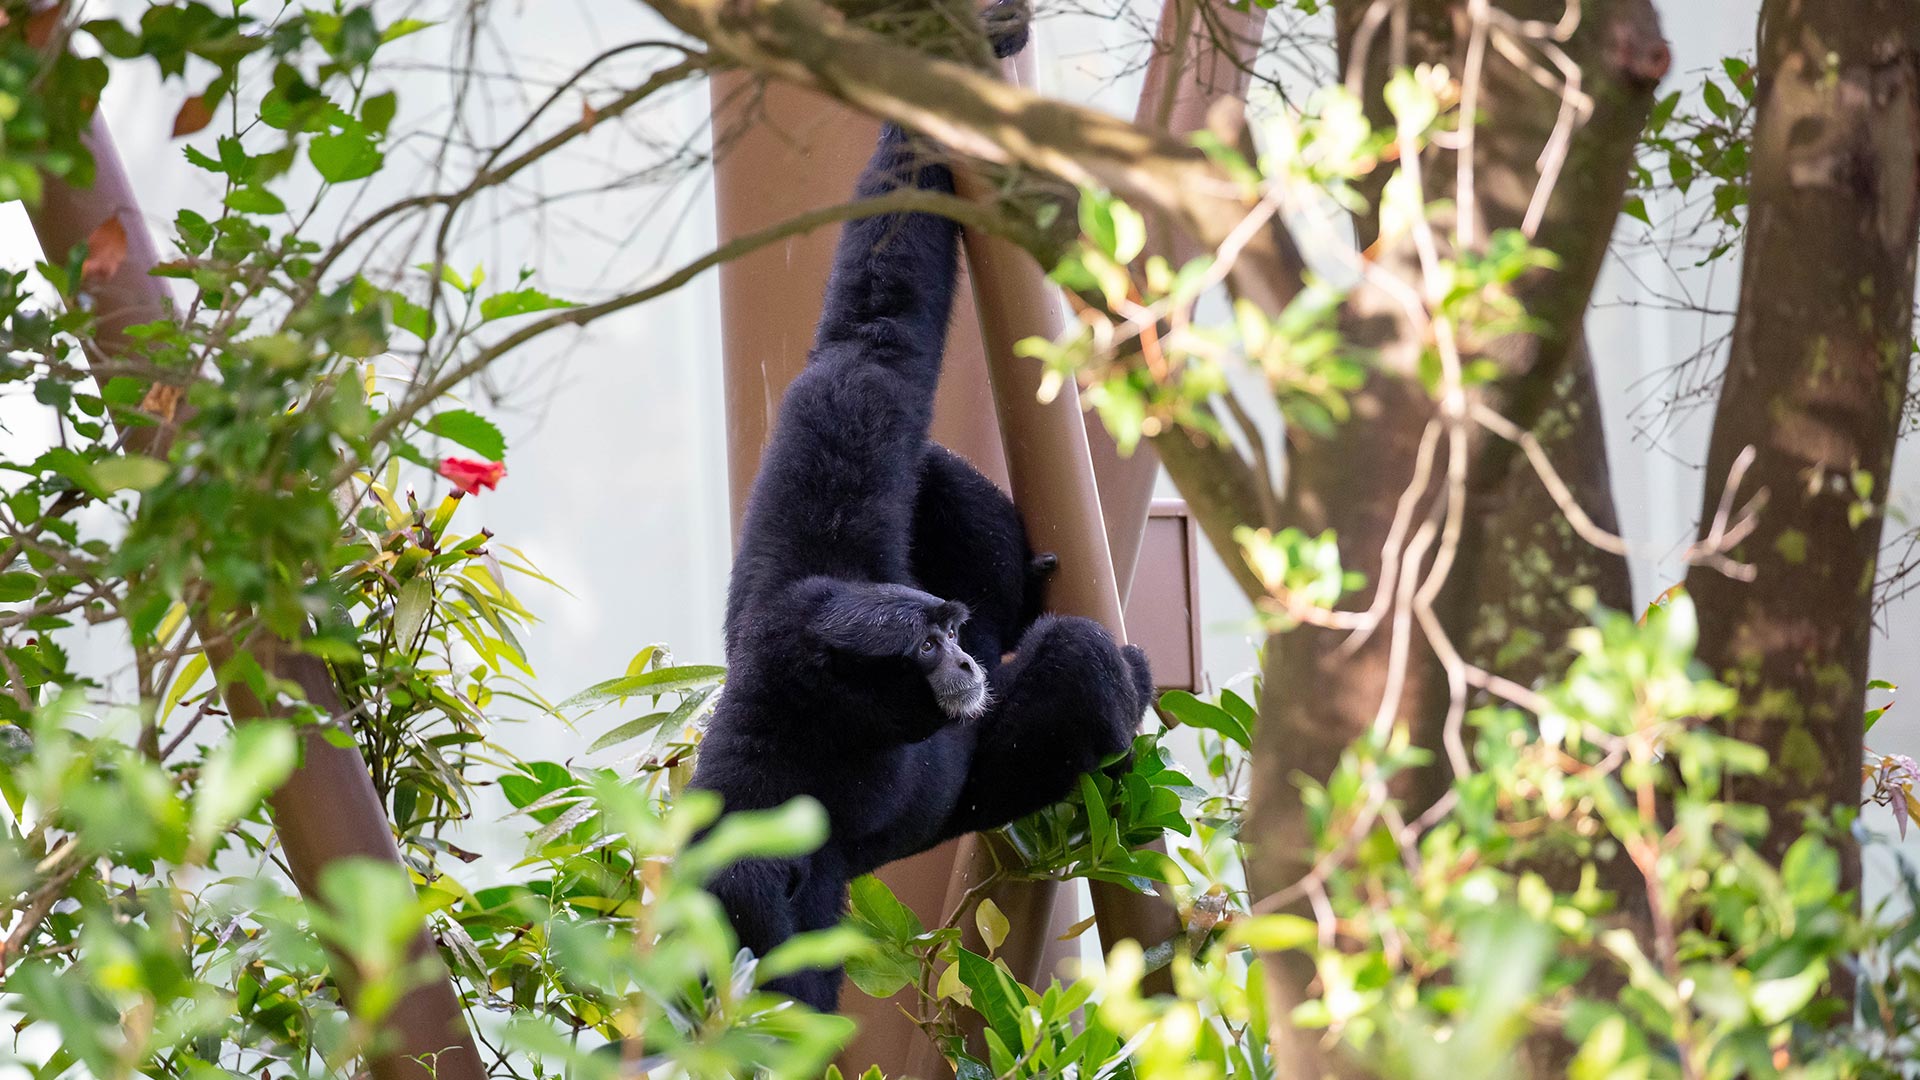 https://cdn.aucklandunlimited.com/zoo/assets/media/siamang-hanging-off-tree-structure-gallery.jpg